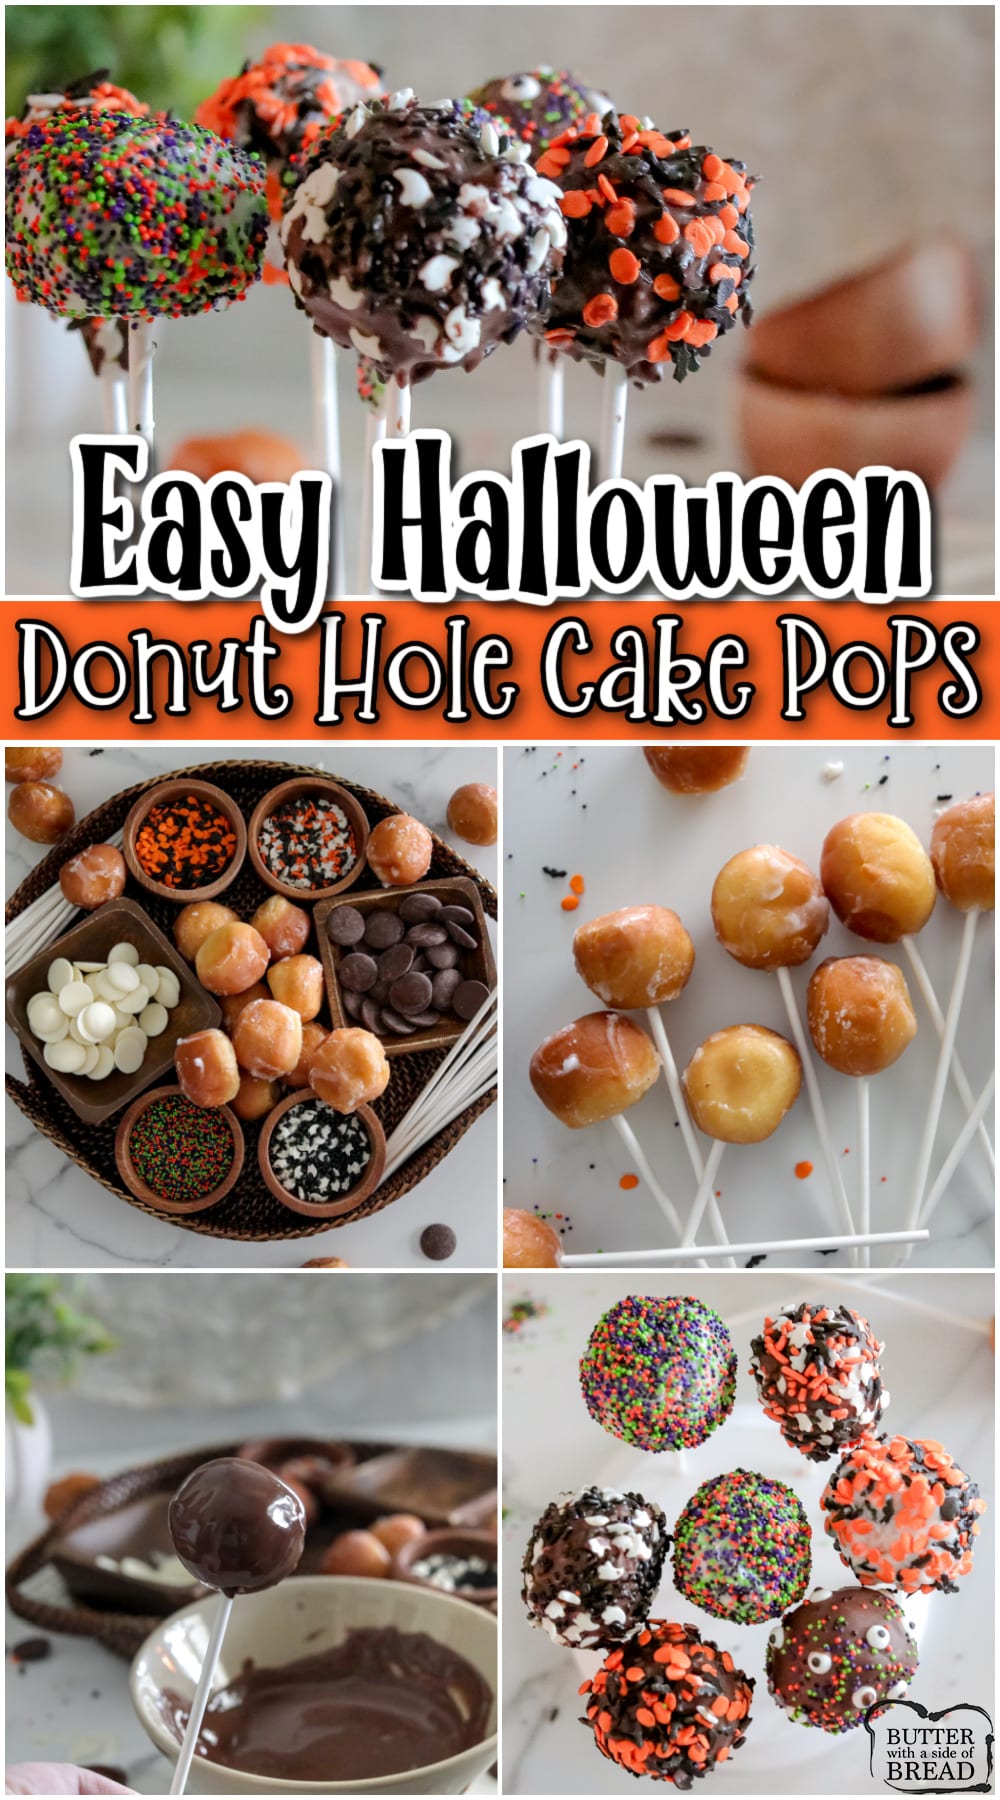 Halloween Donut Hole Cake Pops are so festive and made in just minutes! These no-bake Halloween treats are simple to make and taste absolutely incredible too! 